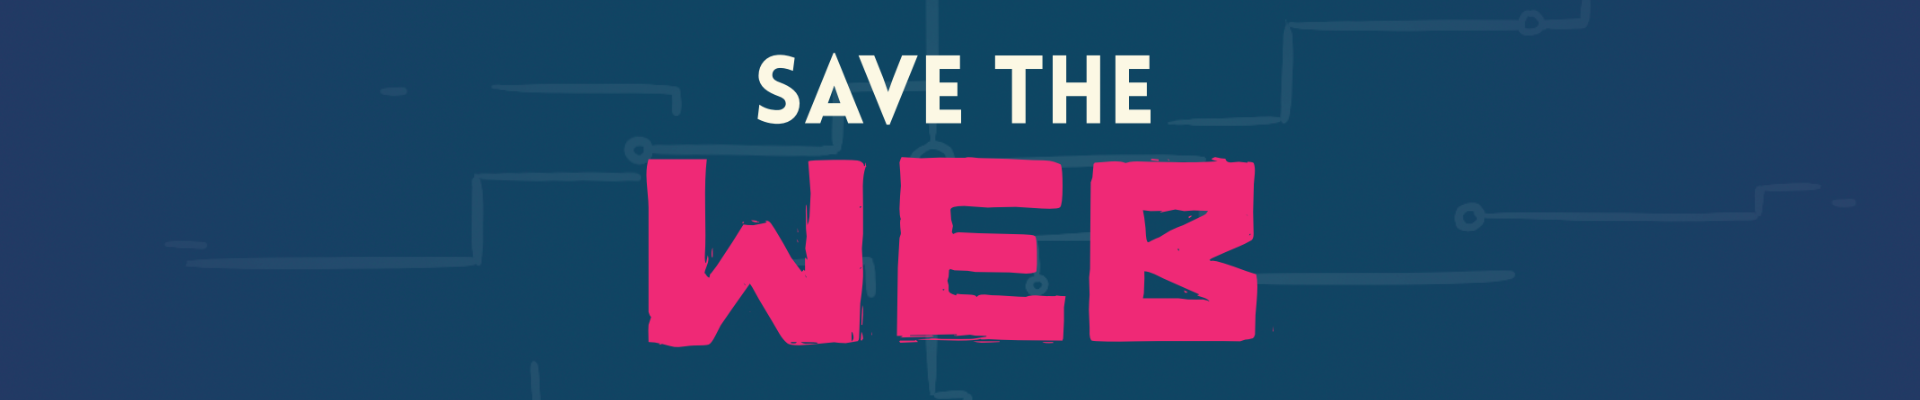 Save The Web